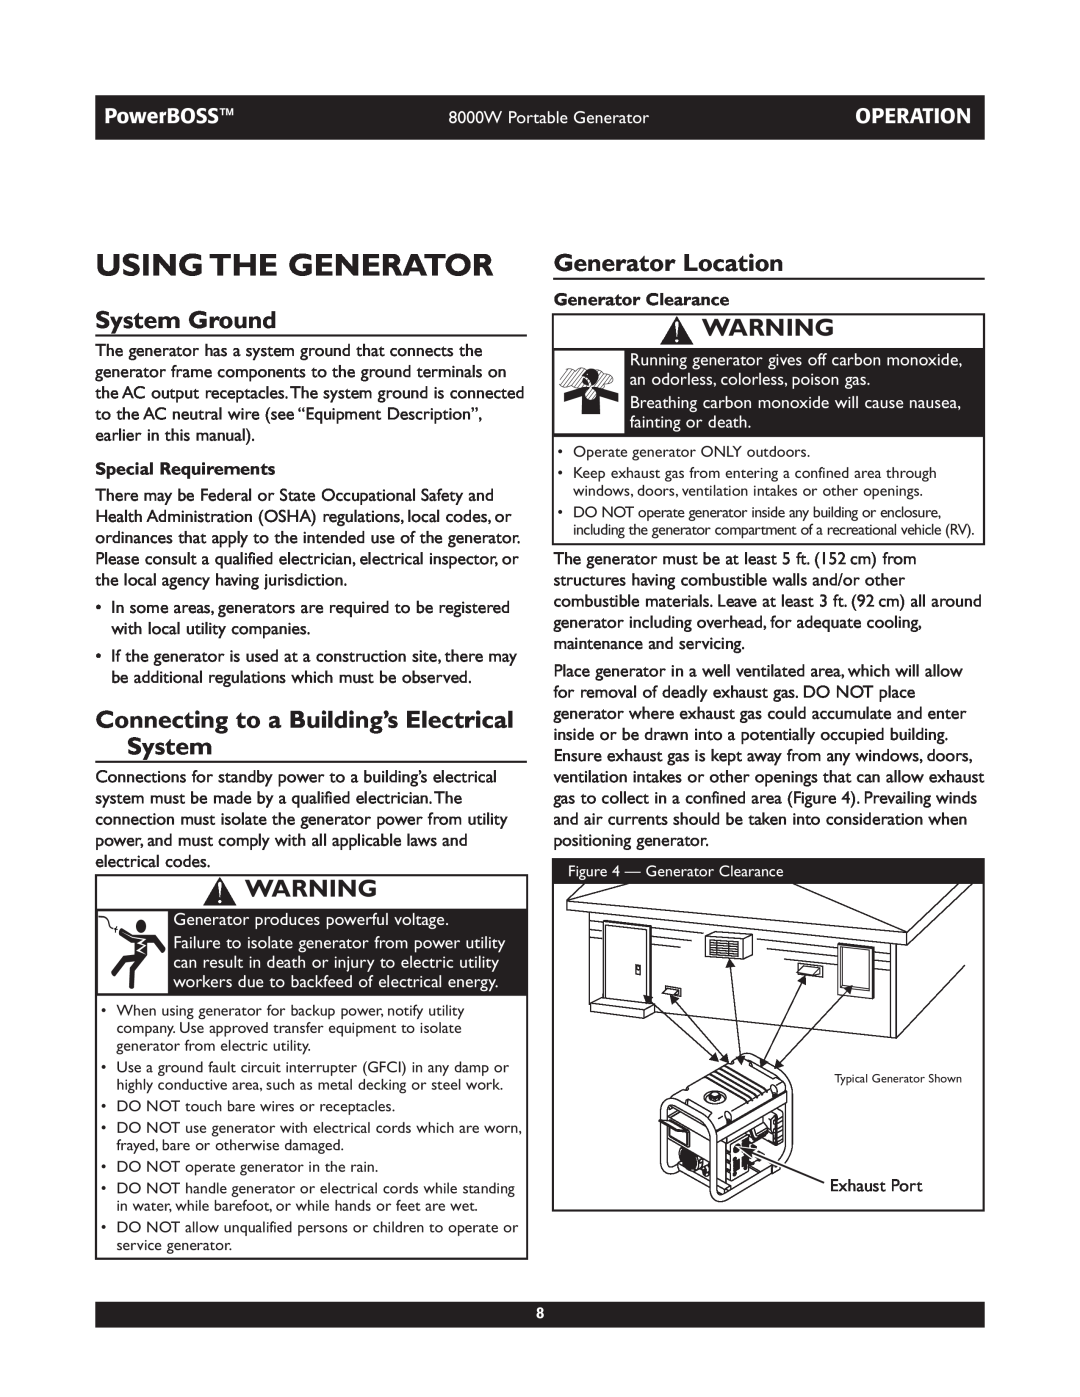 Briggs & Stratton 30228 Using The Generator, System Ground, Connecting to a Building’s Electrical System, Operation 